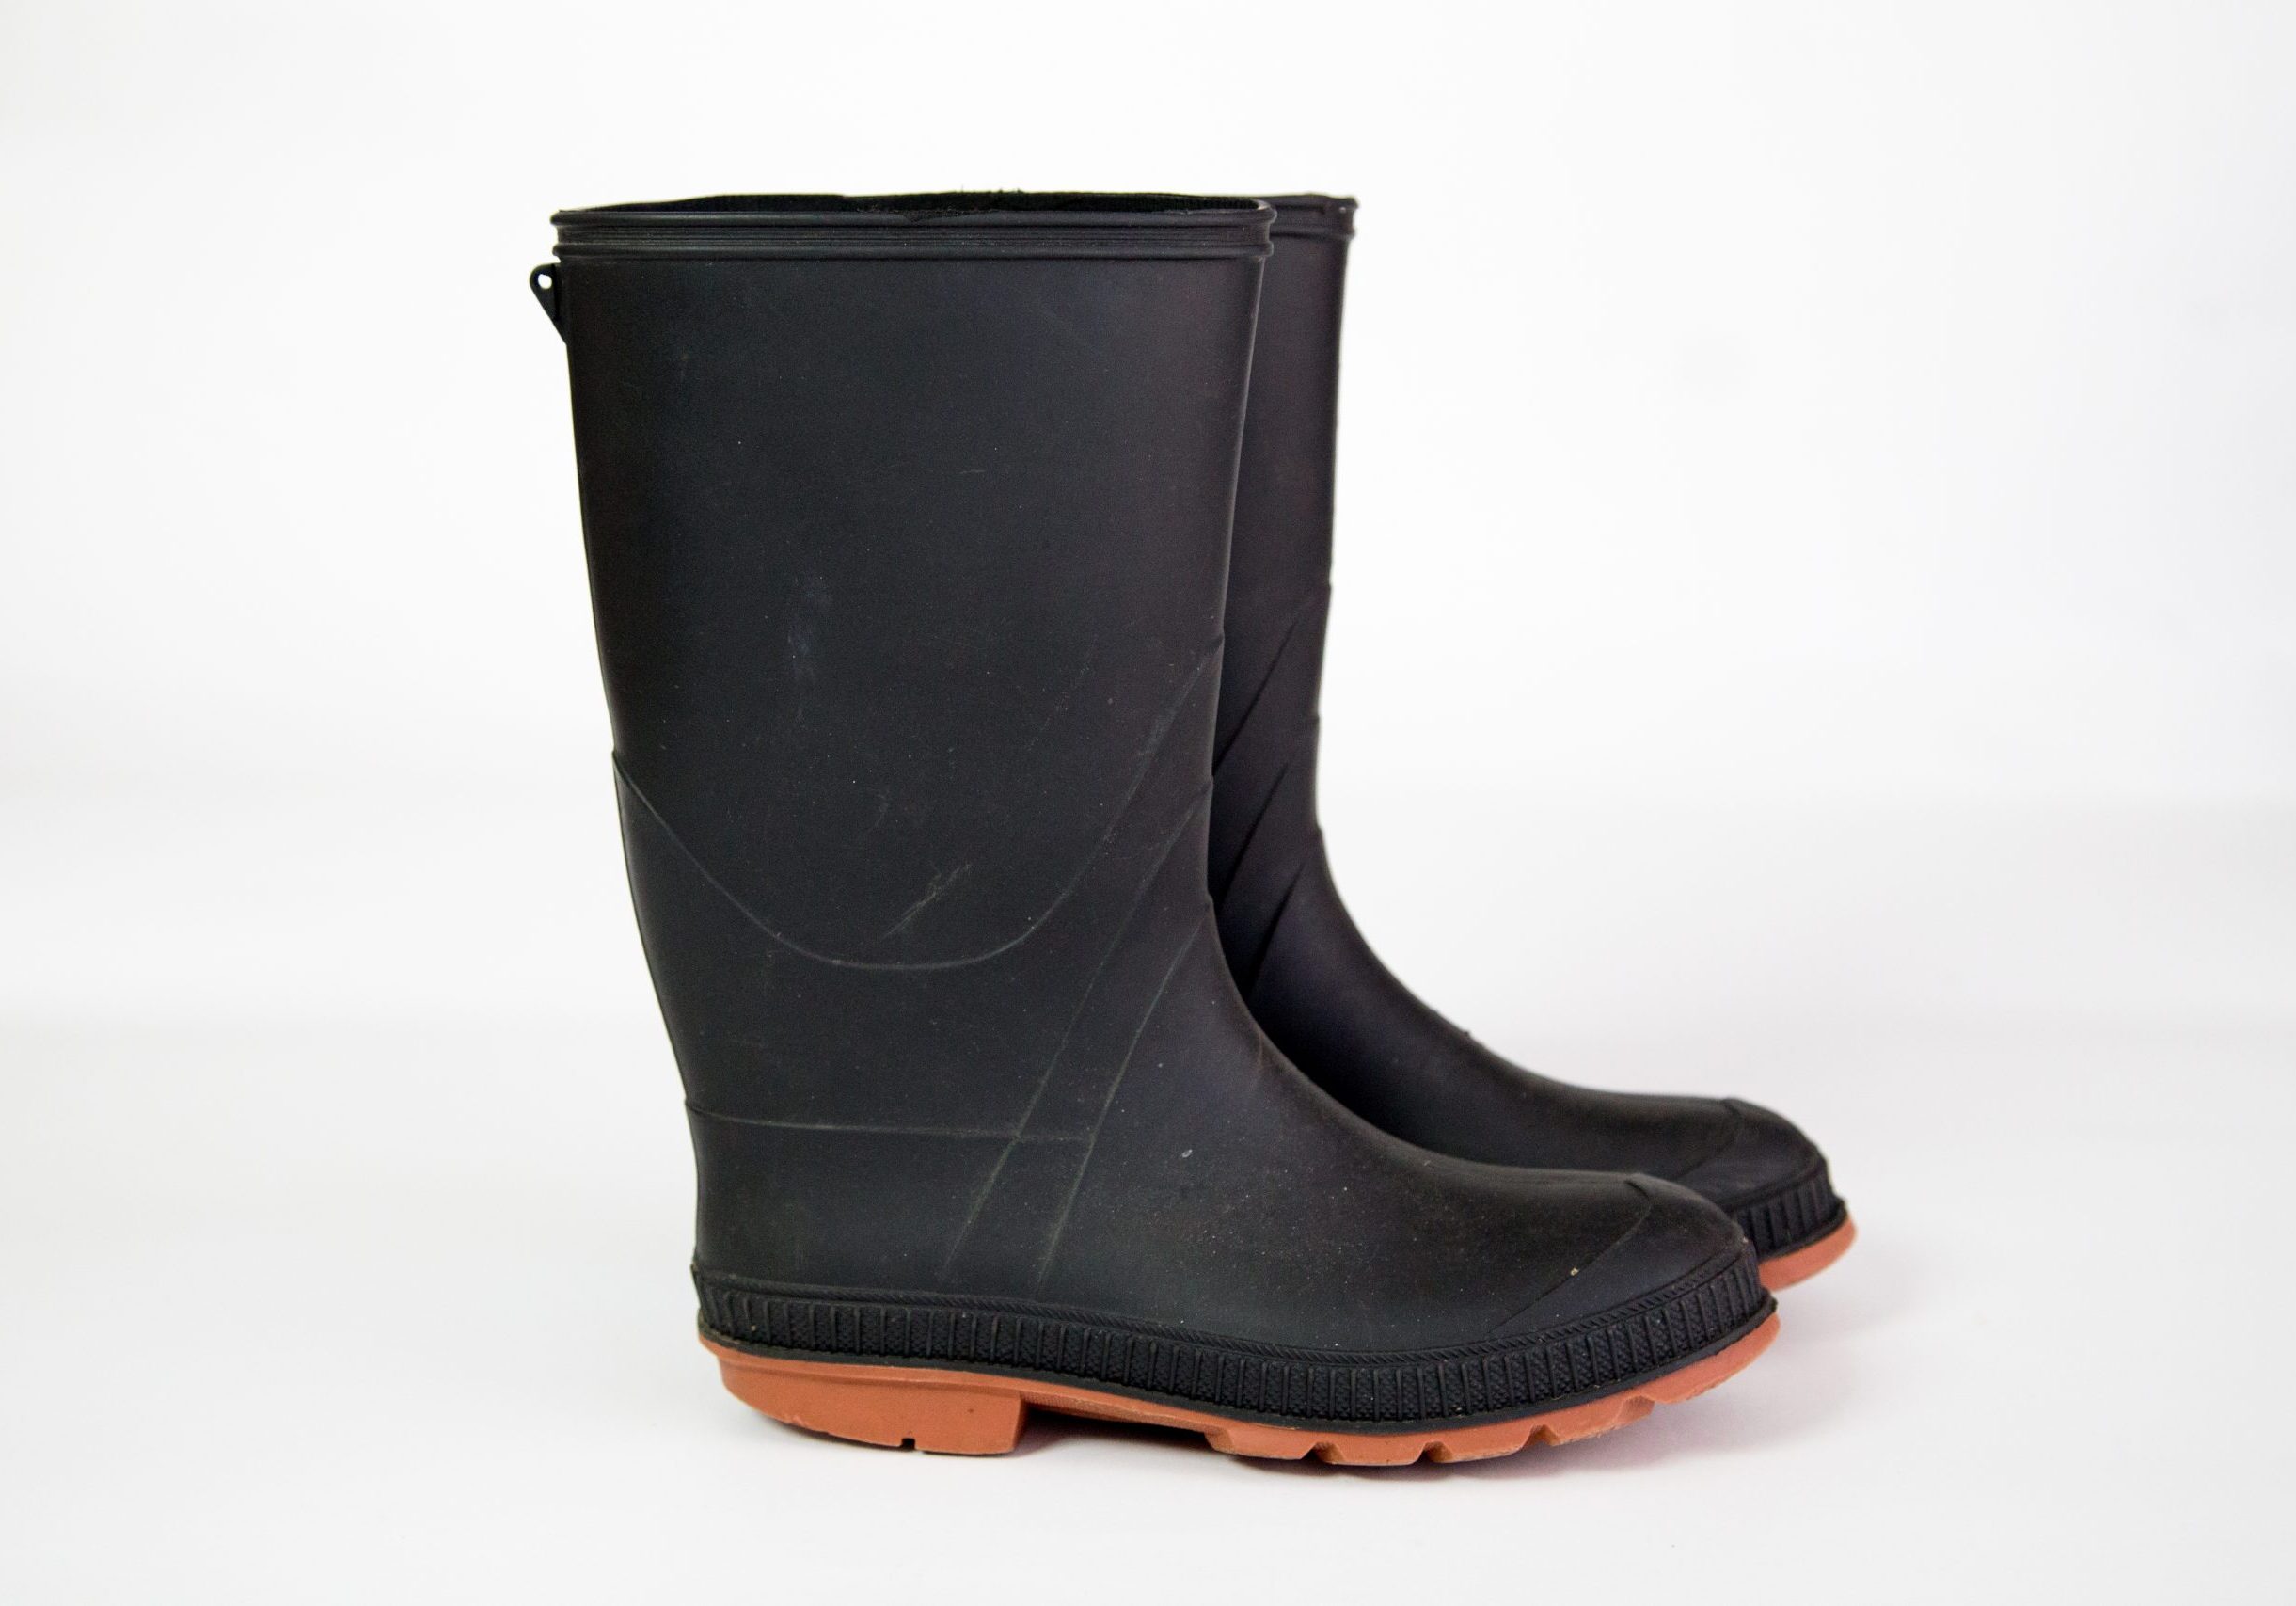 The Ugly Black Rubber Boots_Inae Kim_#108